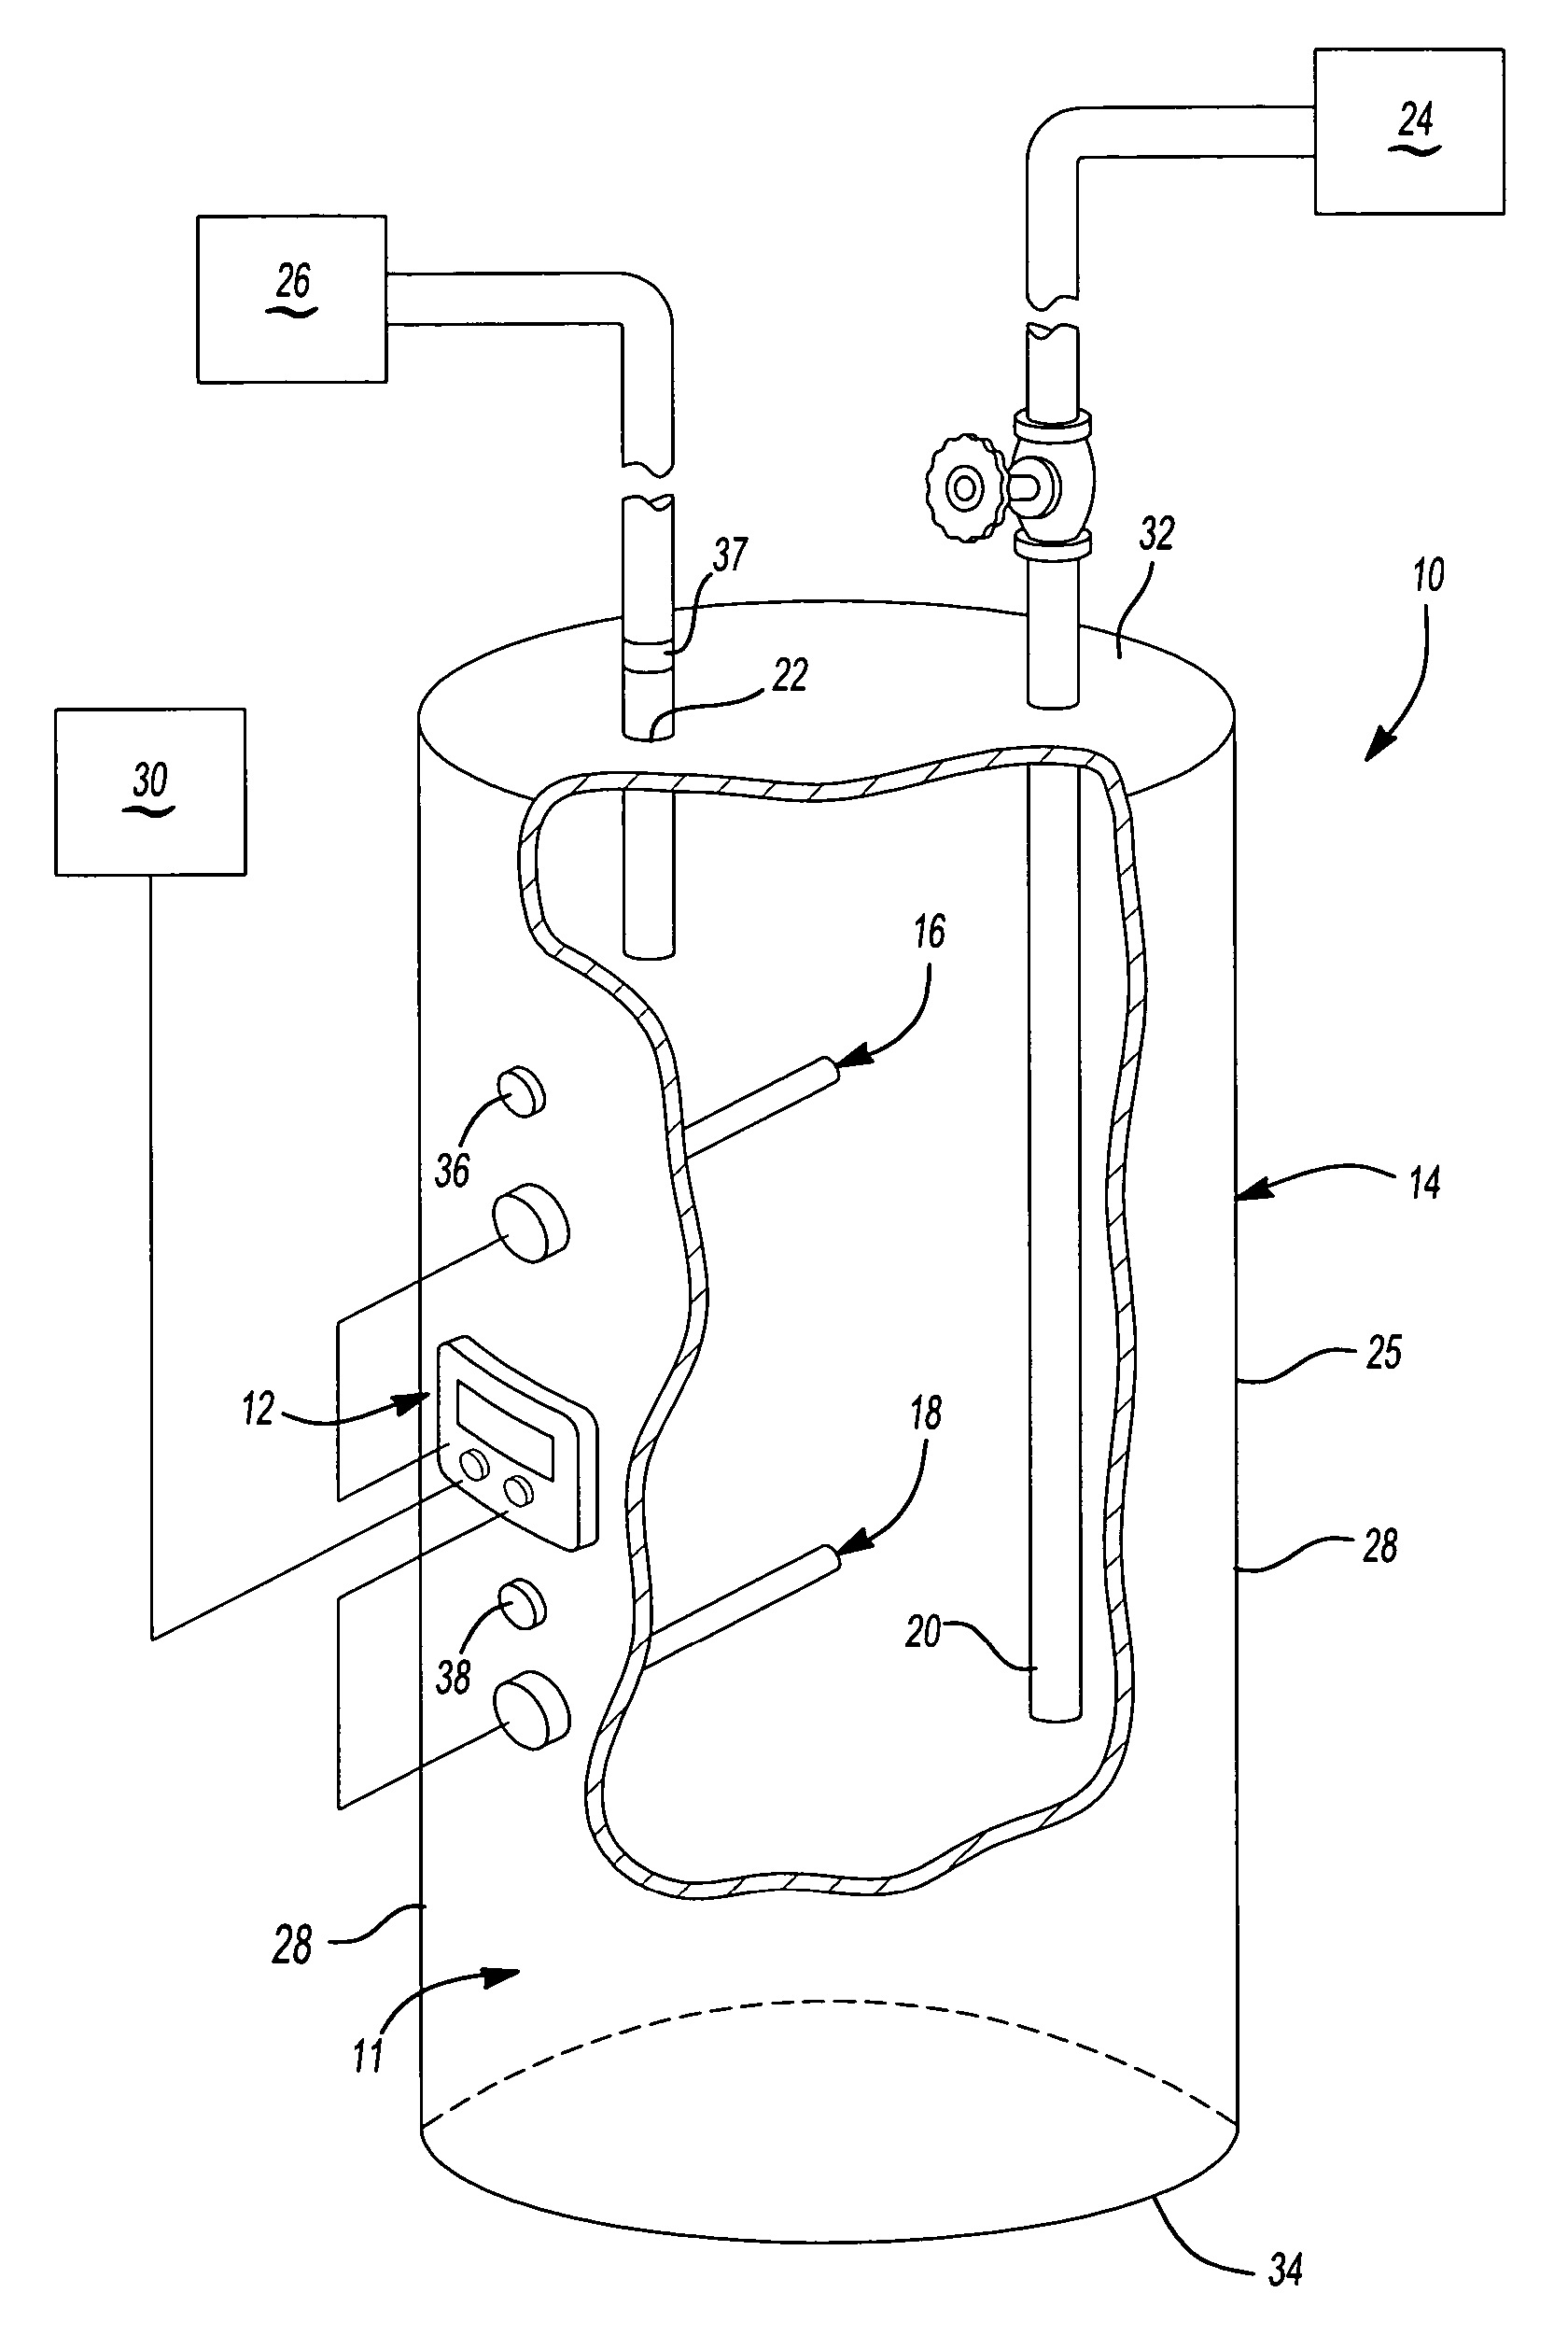 Method and apparatus for operating an electric water heater